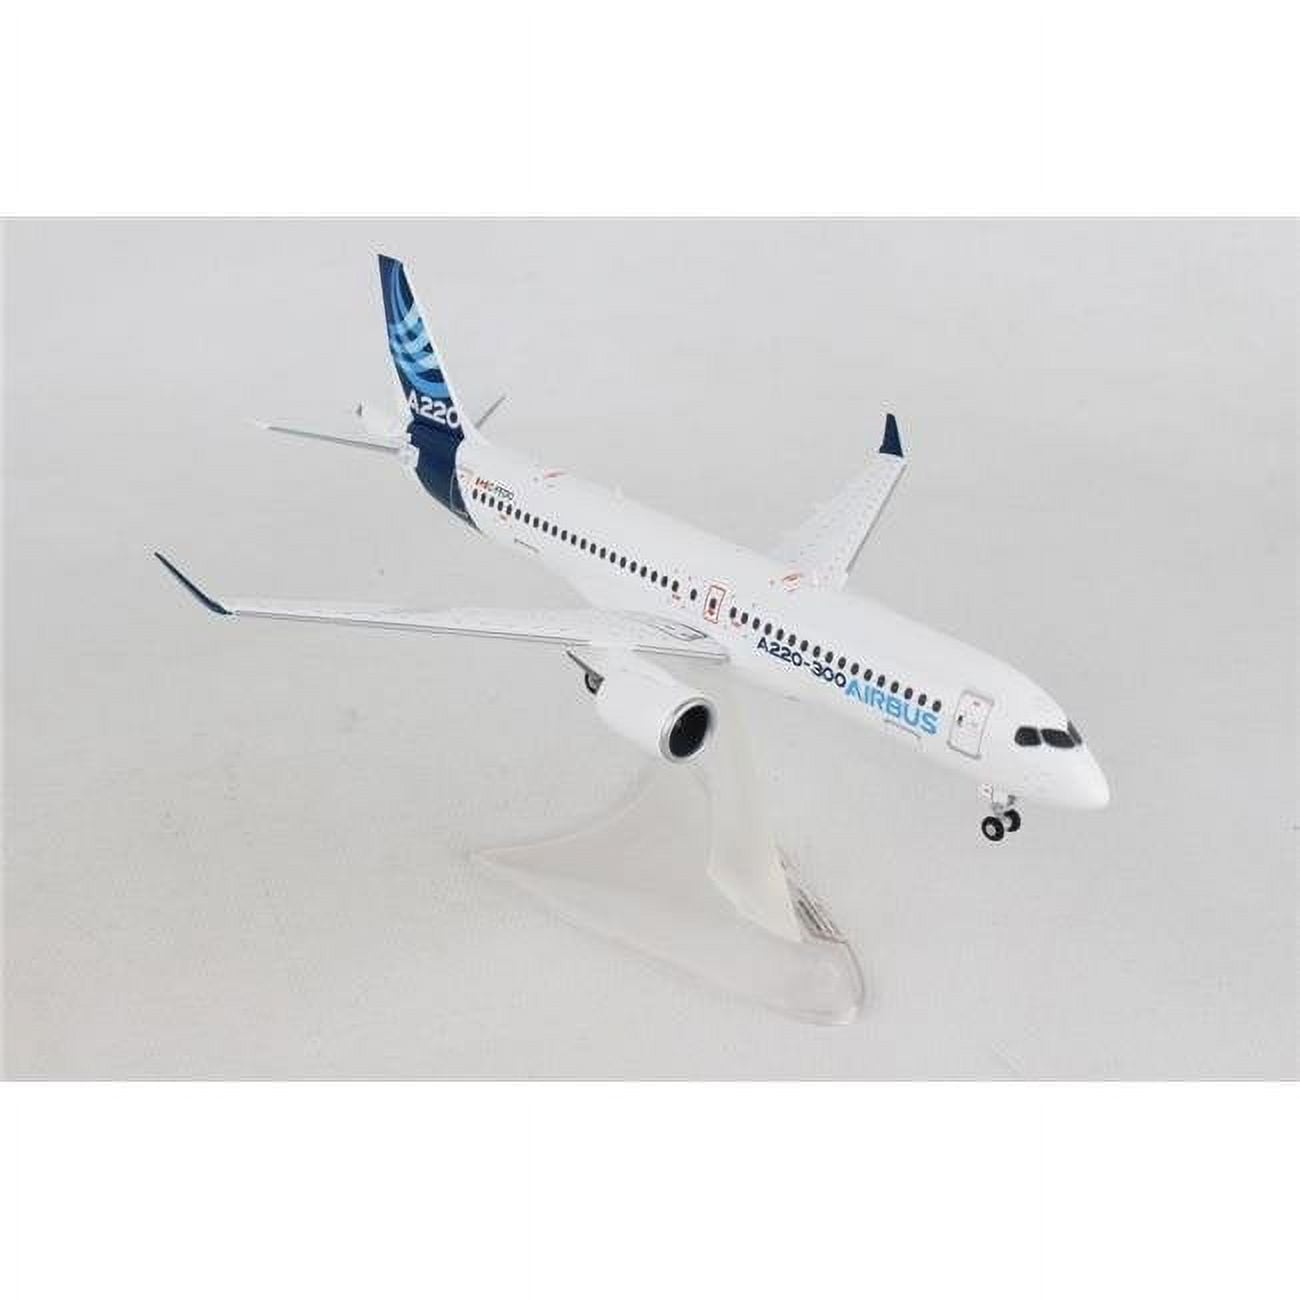 He559515 1 By 200 Scale Airbus House A220-300 Model Aircraft